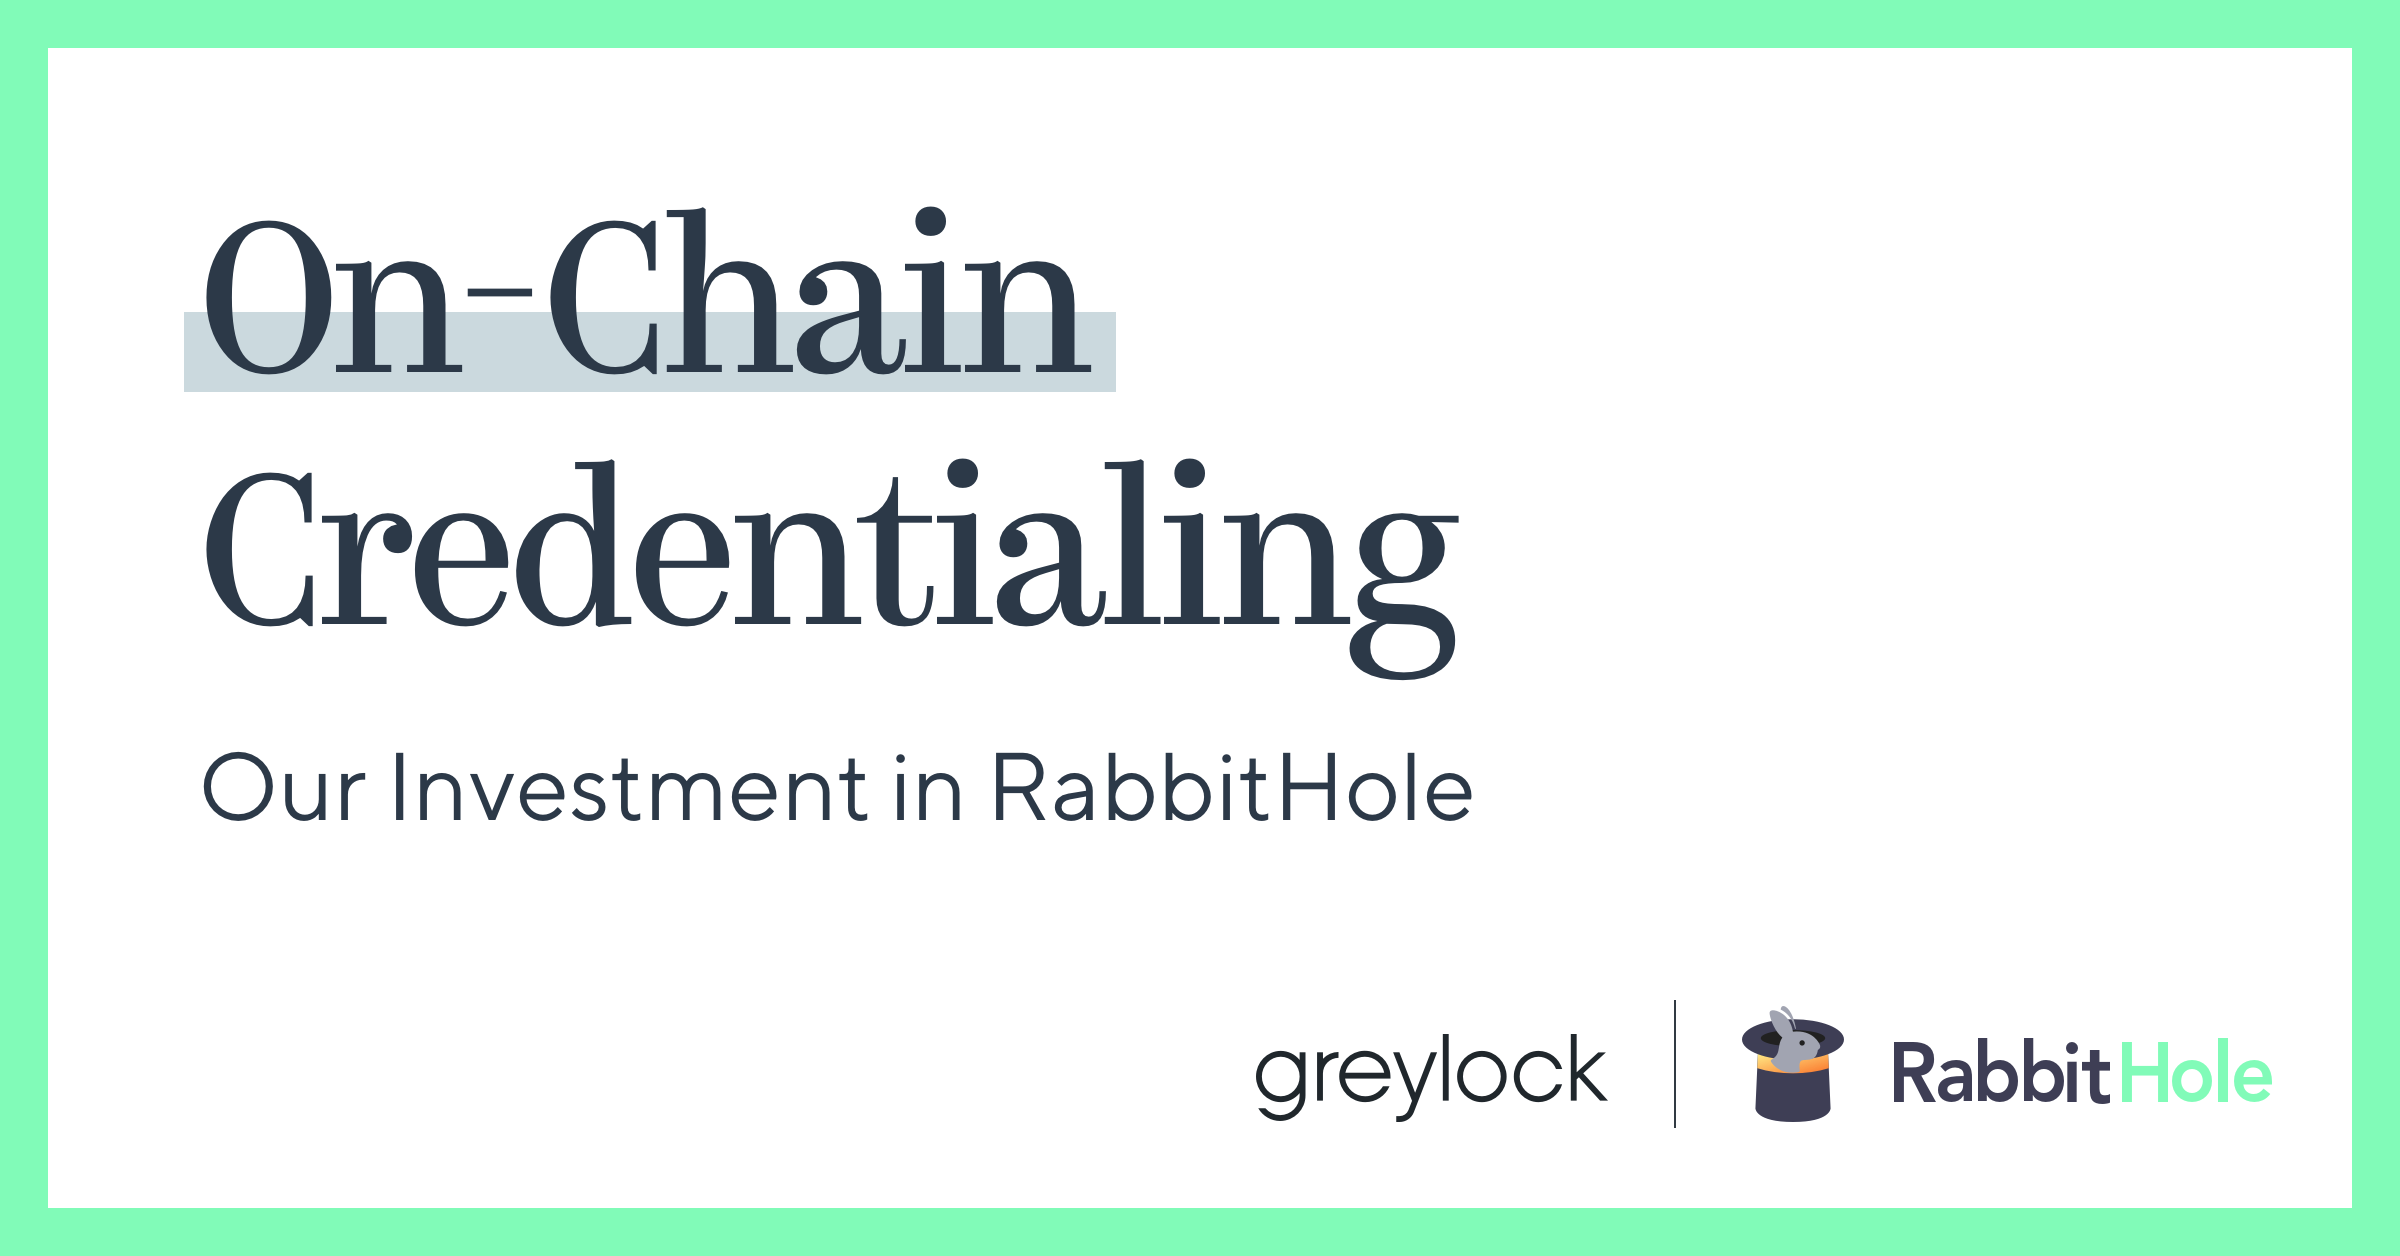 On-Chain Credentialing